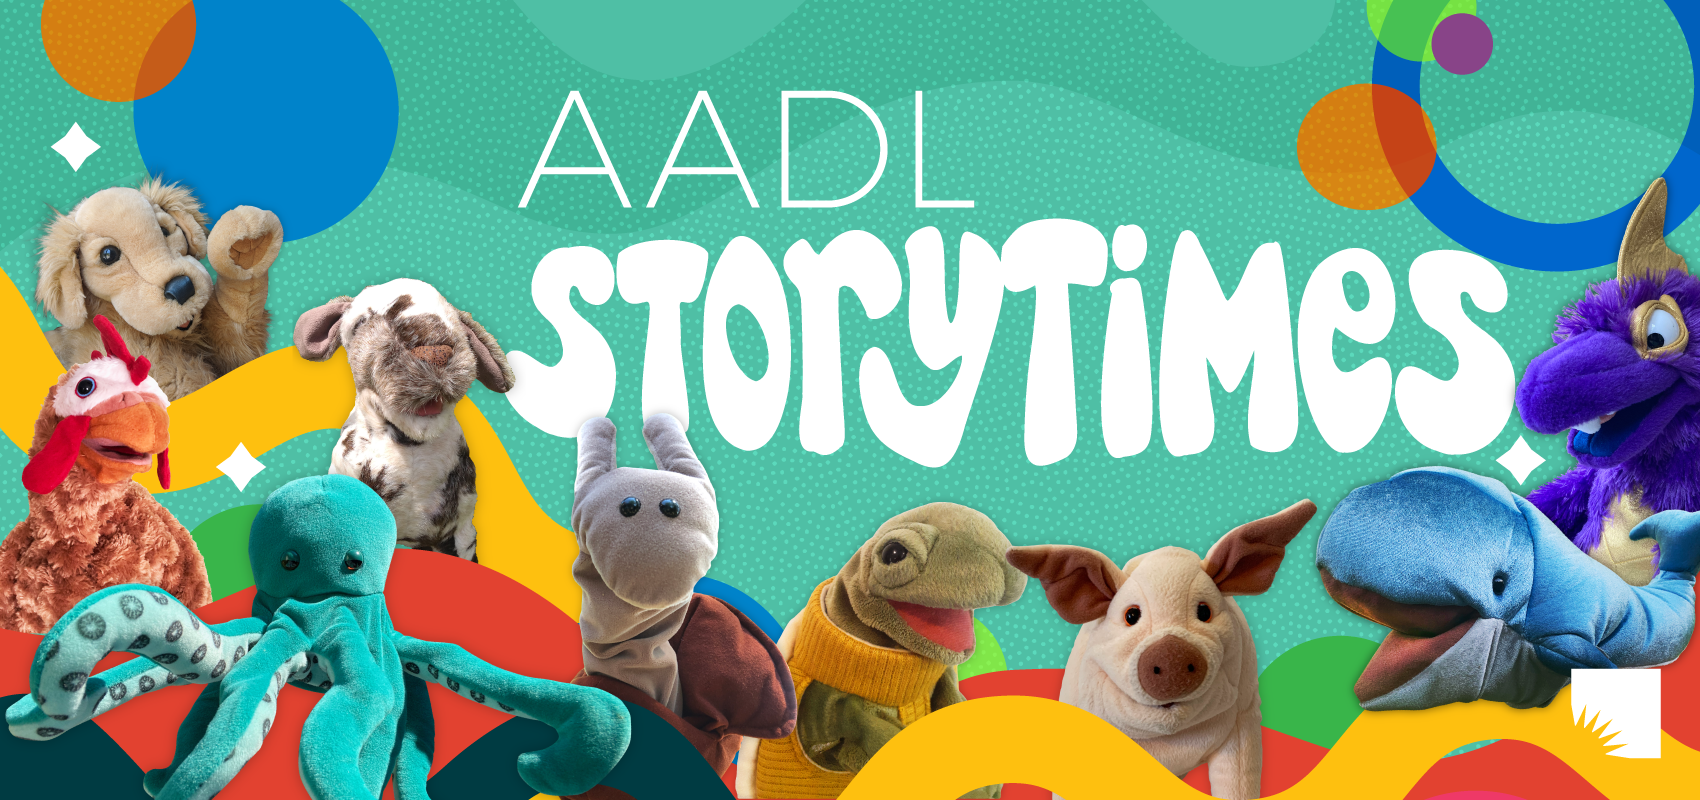 AADL storytimes poster